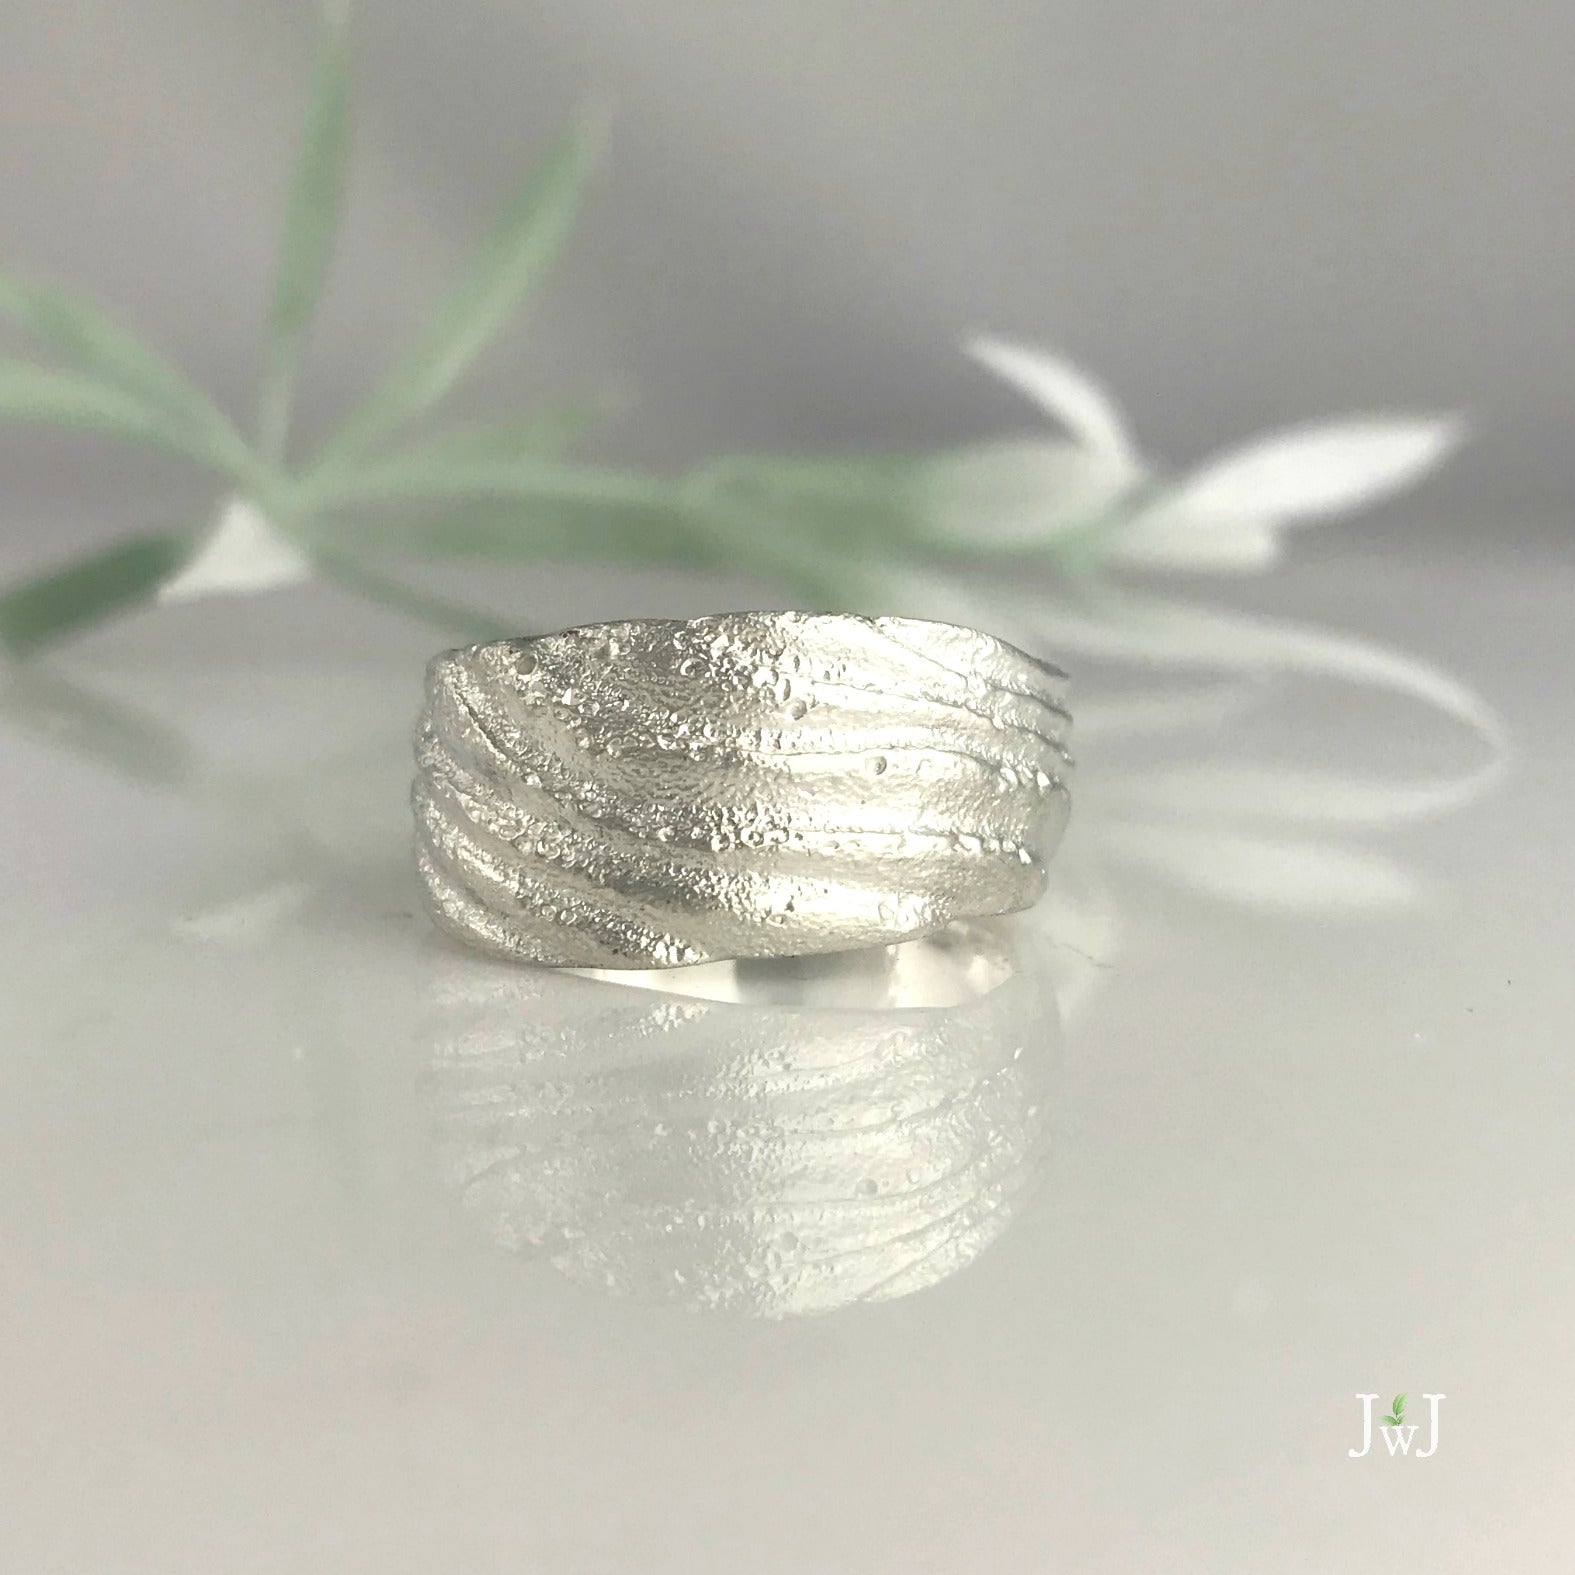 Westhampton Beach Ripple Ring by Jeanette Walker at Garden of Silver in Westhampton Beach, NY.